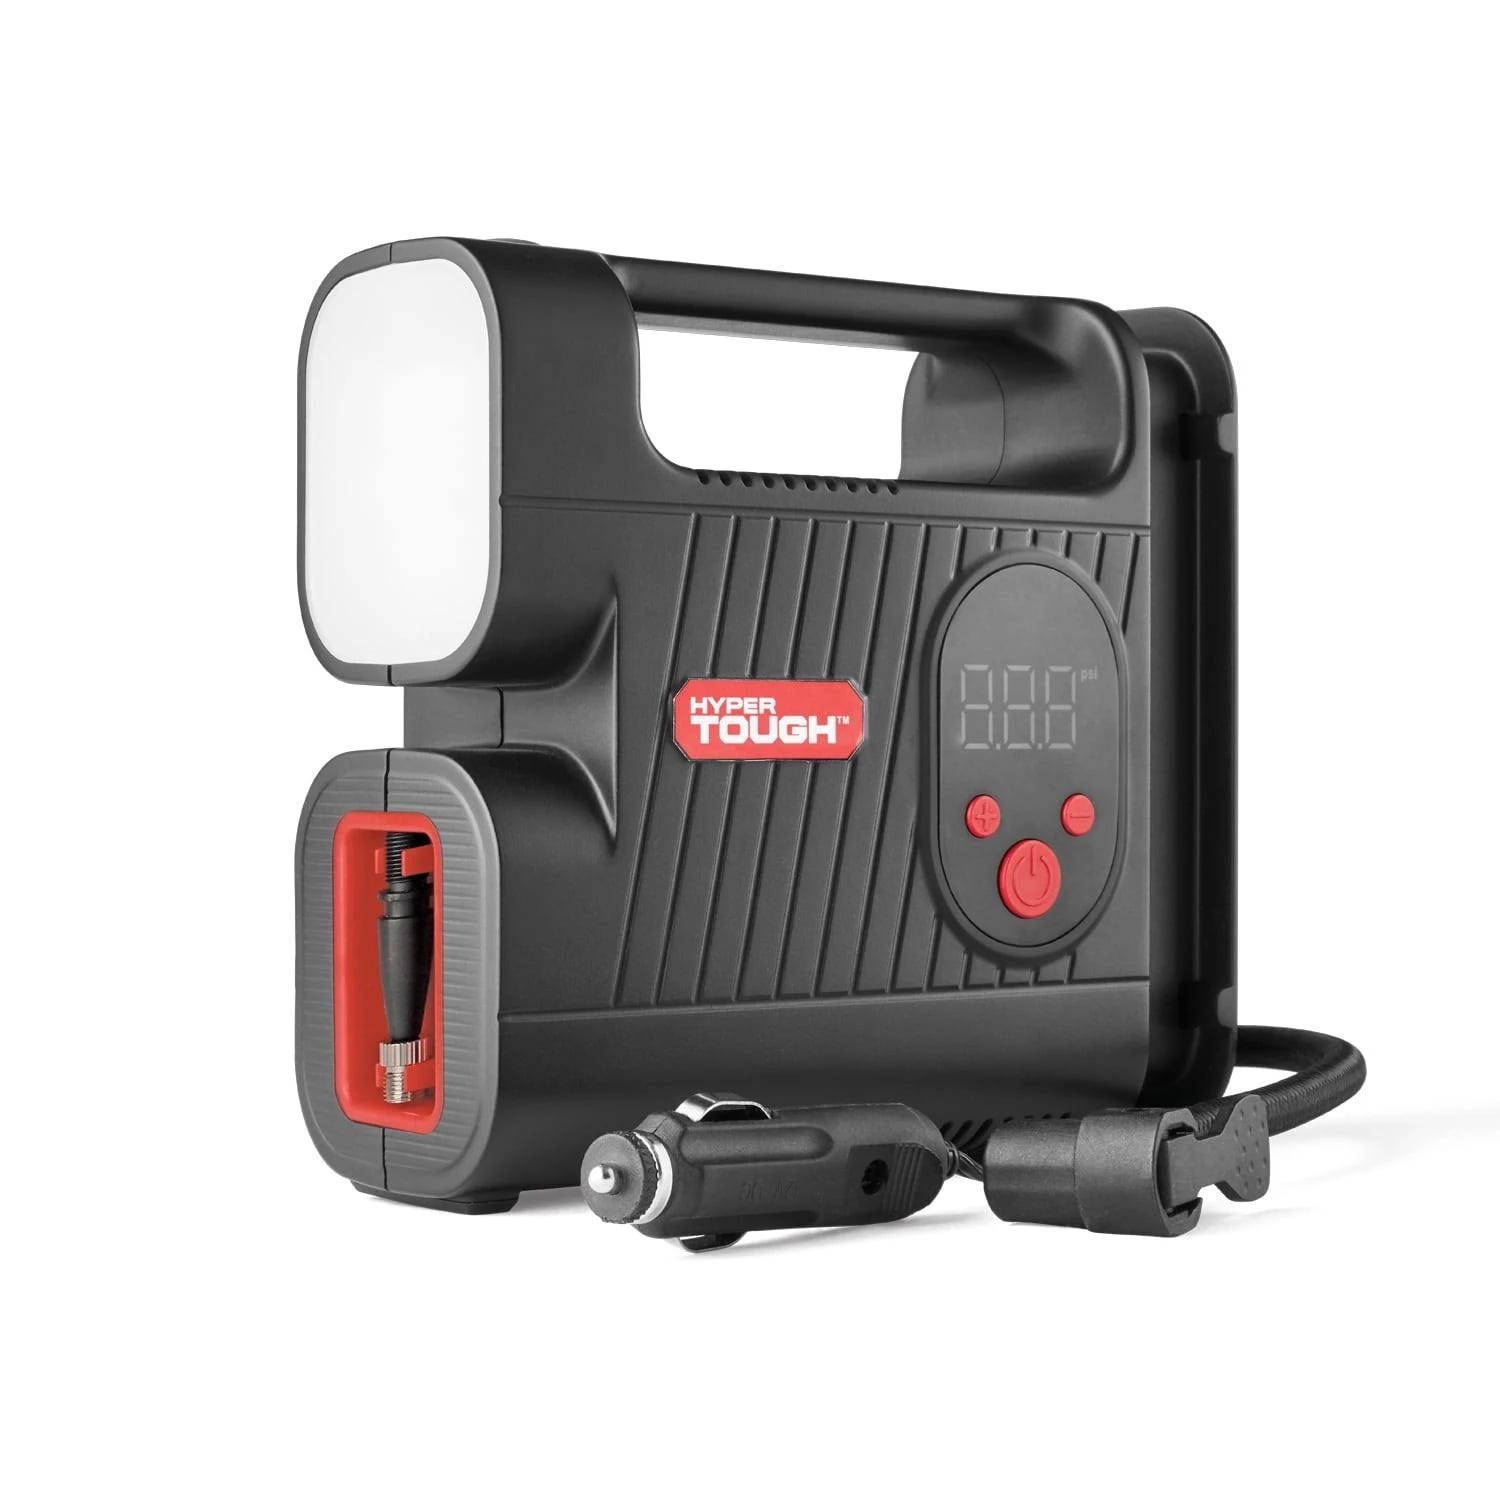 Hyper Tough DC 12V Portable Digital Car Tire Inflator with LED Display and Auto-Off Feature | Image